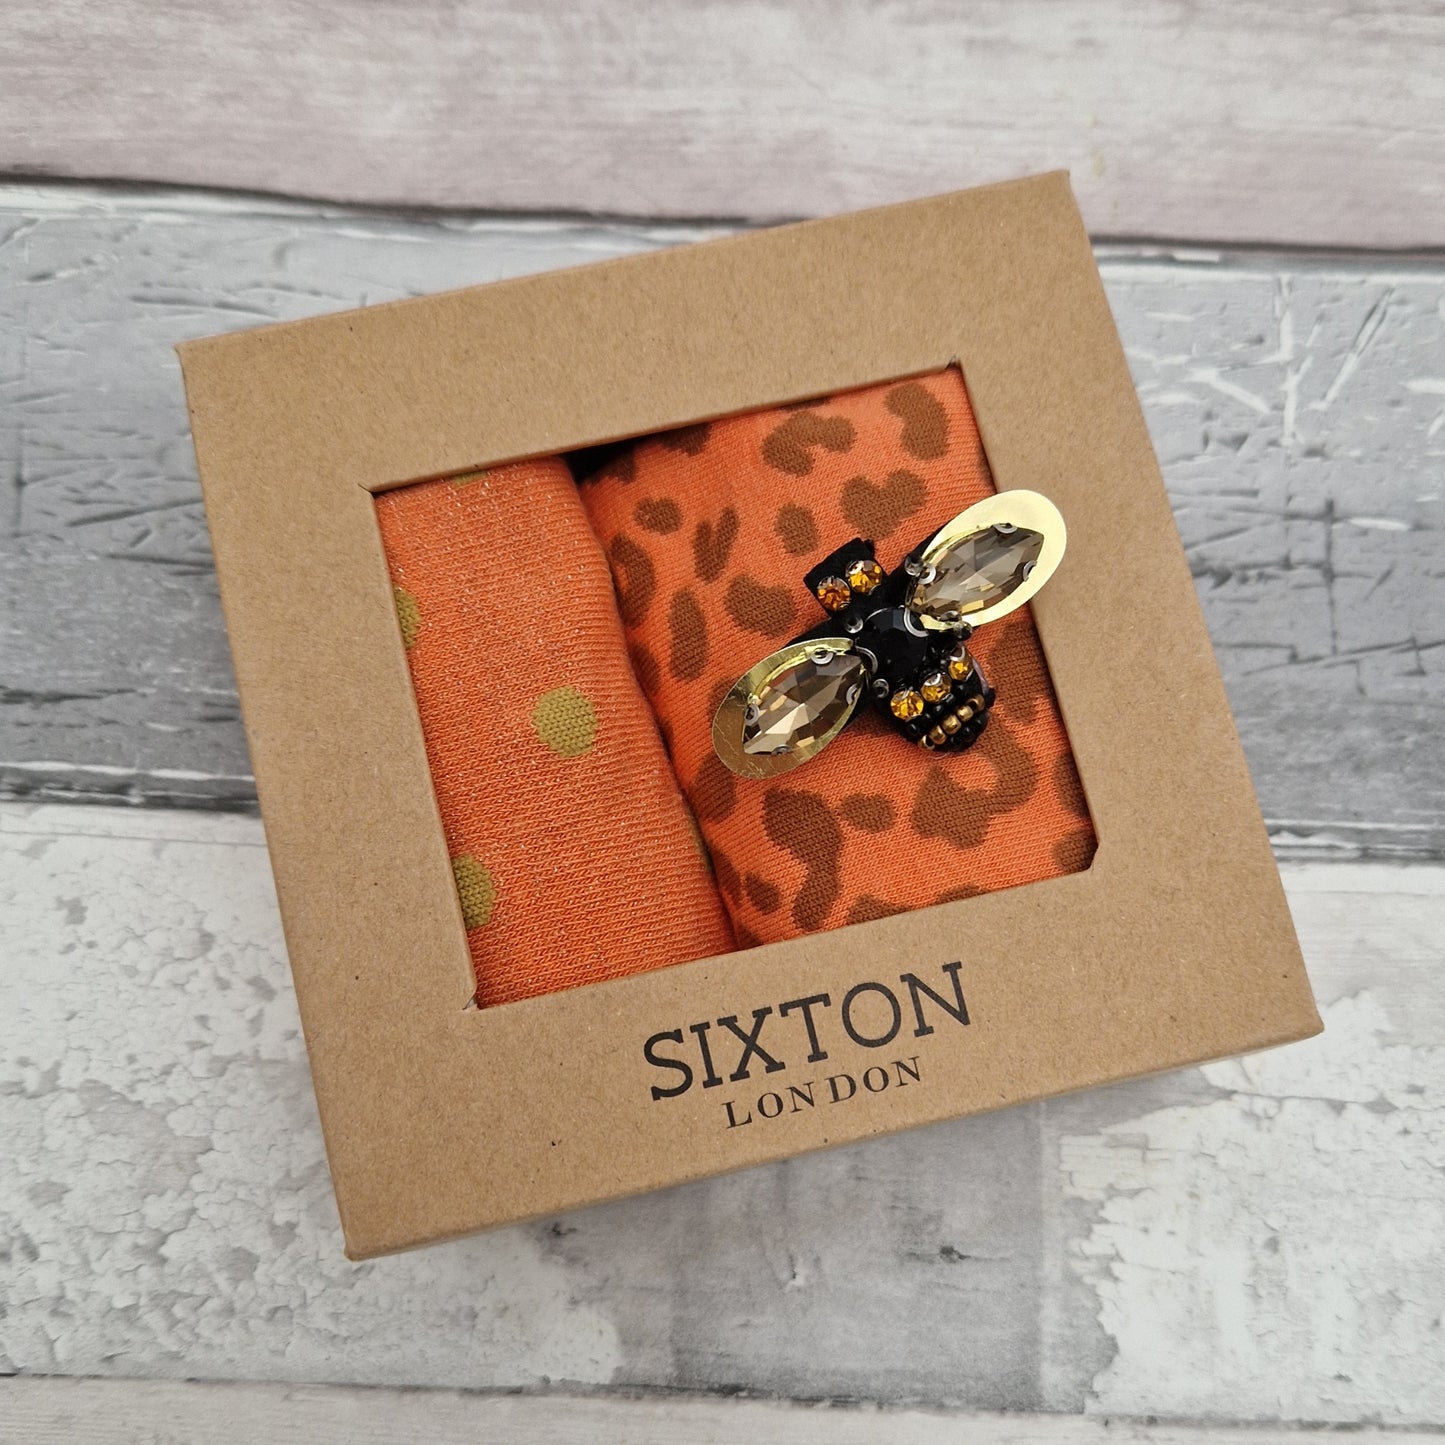 2 Pairs of orange coloured socks presented in a gift box with a sparkling Bee Brooch made of recycled glass.